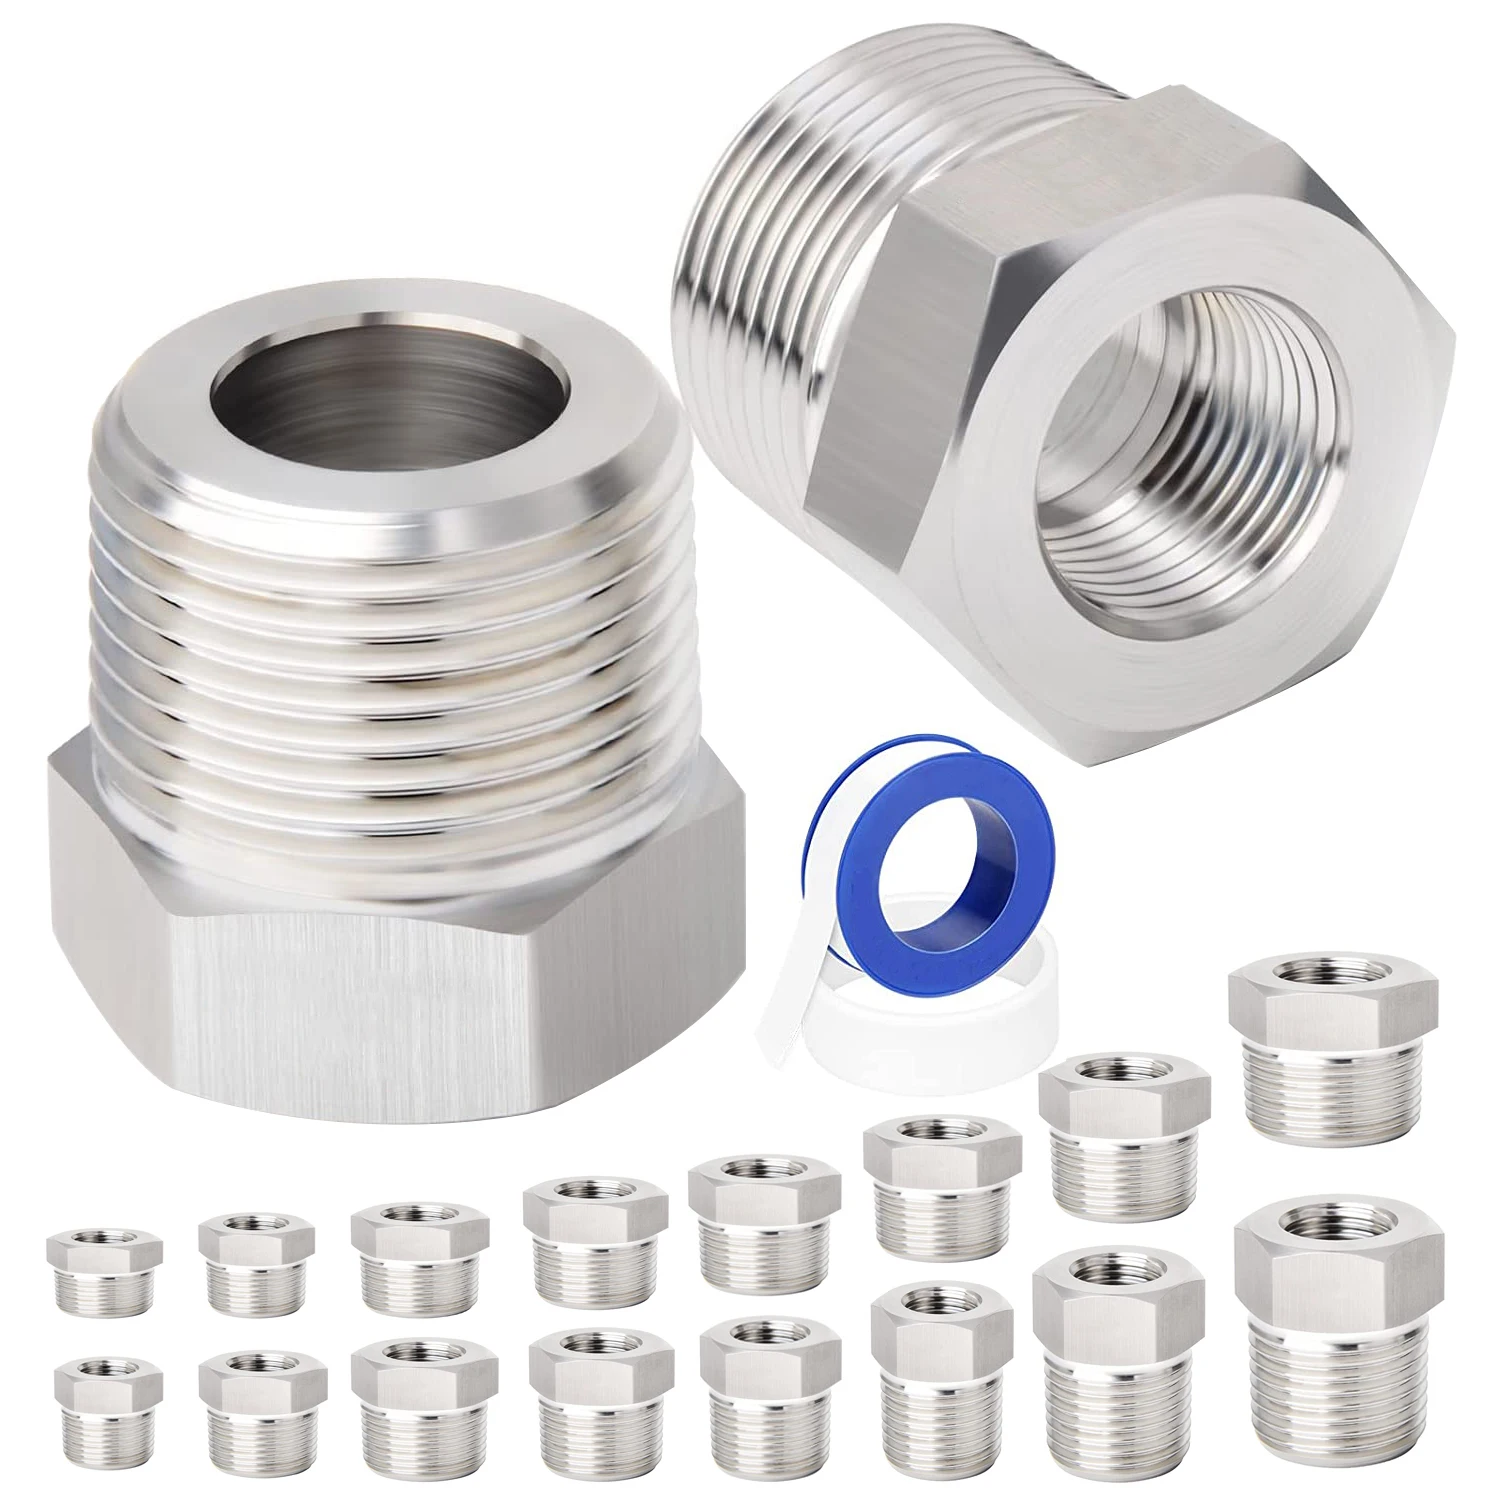 

2pcs Reducer Bushing 1/8" 1/4" 3/8" 1/2" BSP Male/Female Thread 304 Stainless Steel Pipe Fittings for Water Gas Oil w PTFE Tape